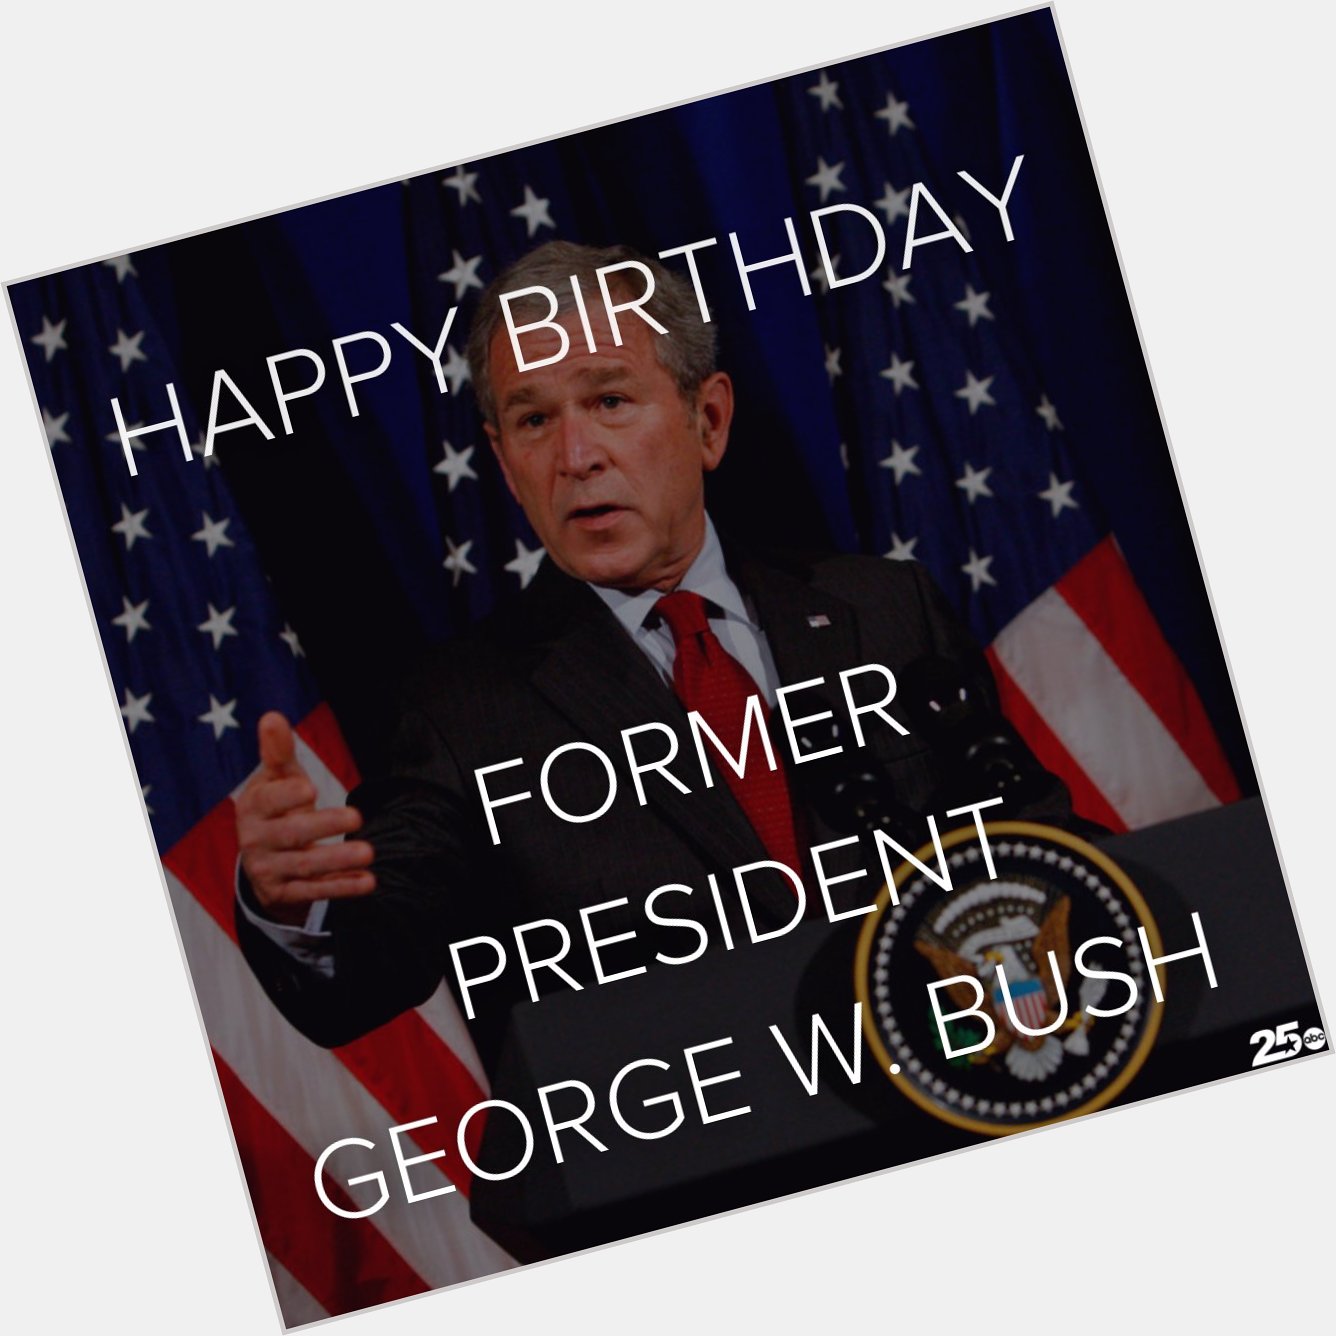 Happy 76th Birthday to the 43rd President of the United States, George W. Bush 